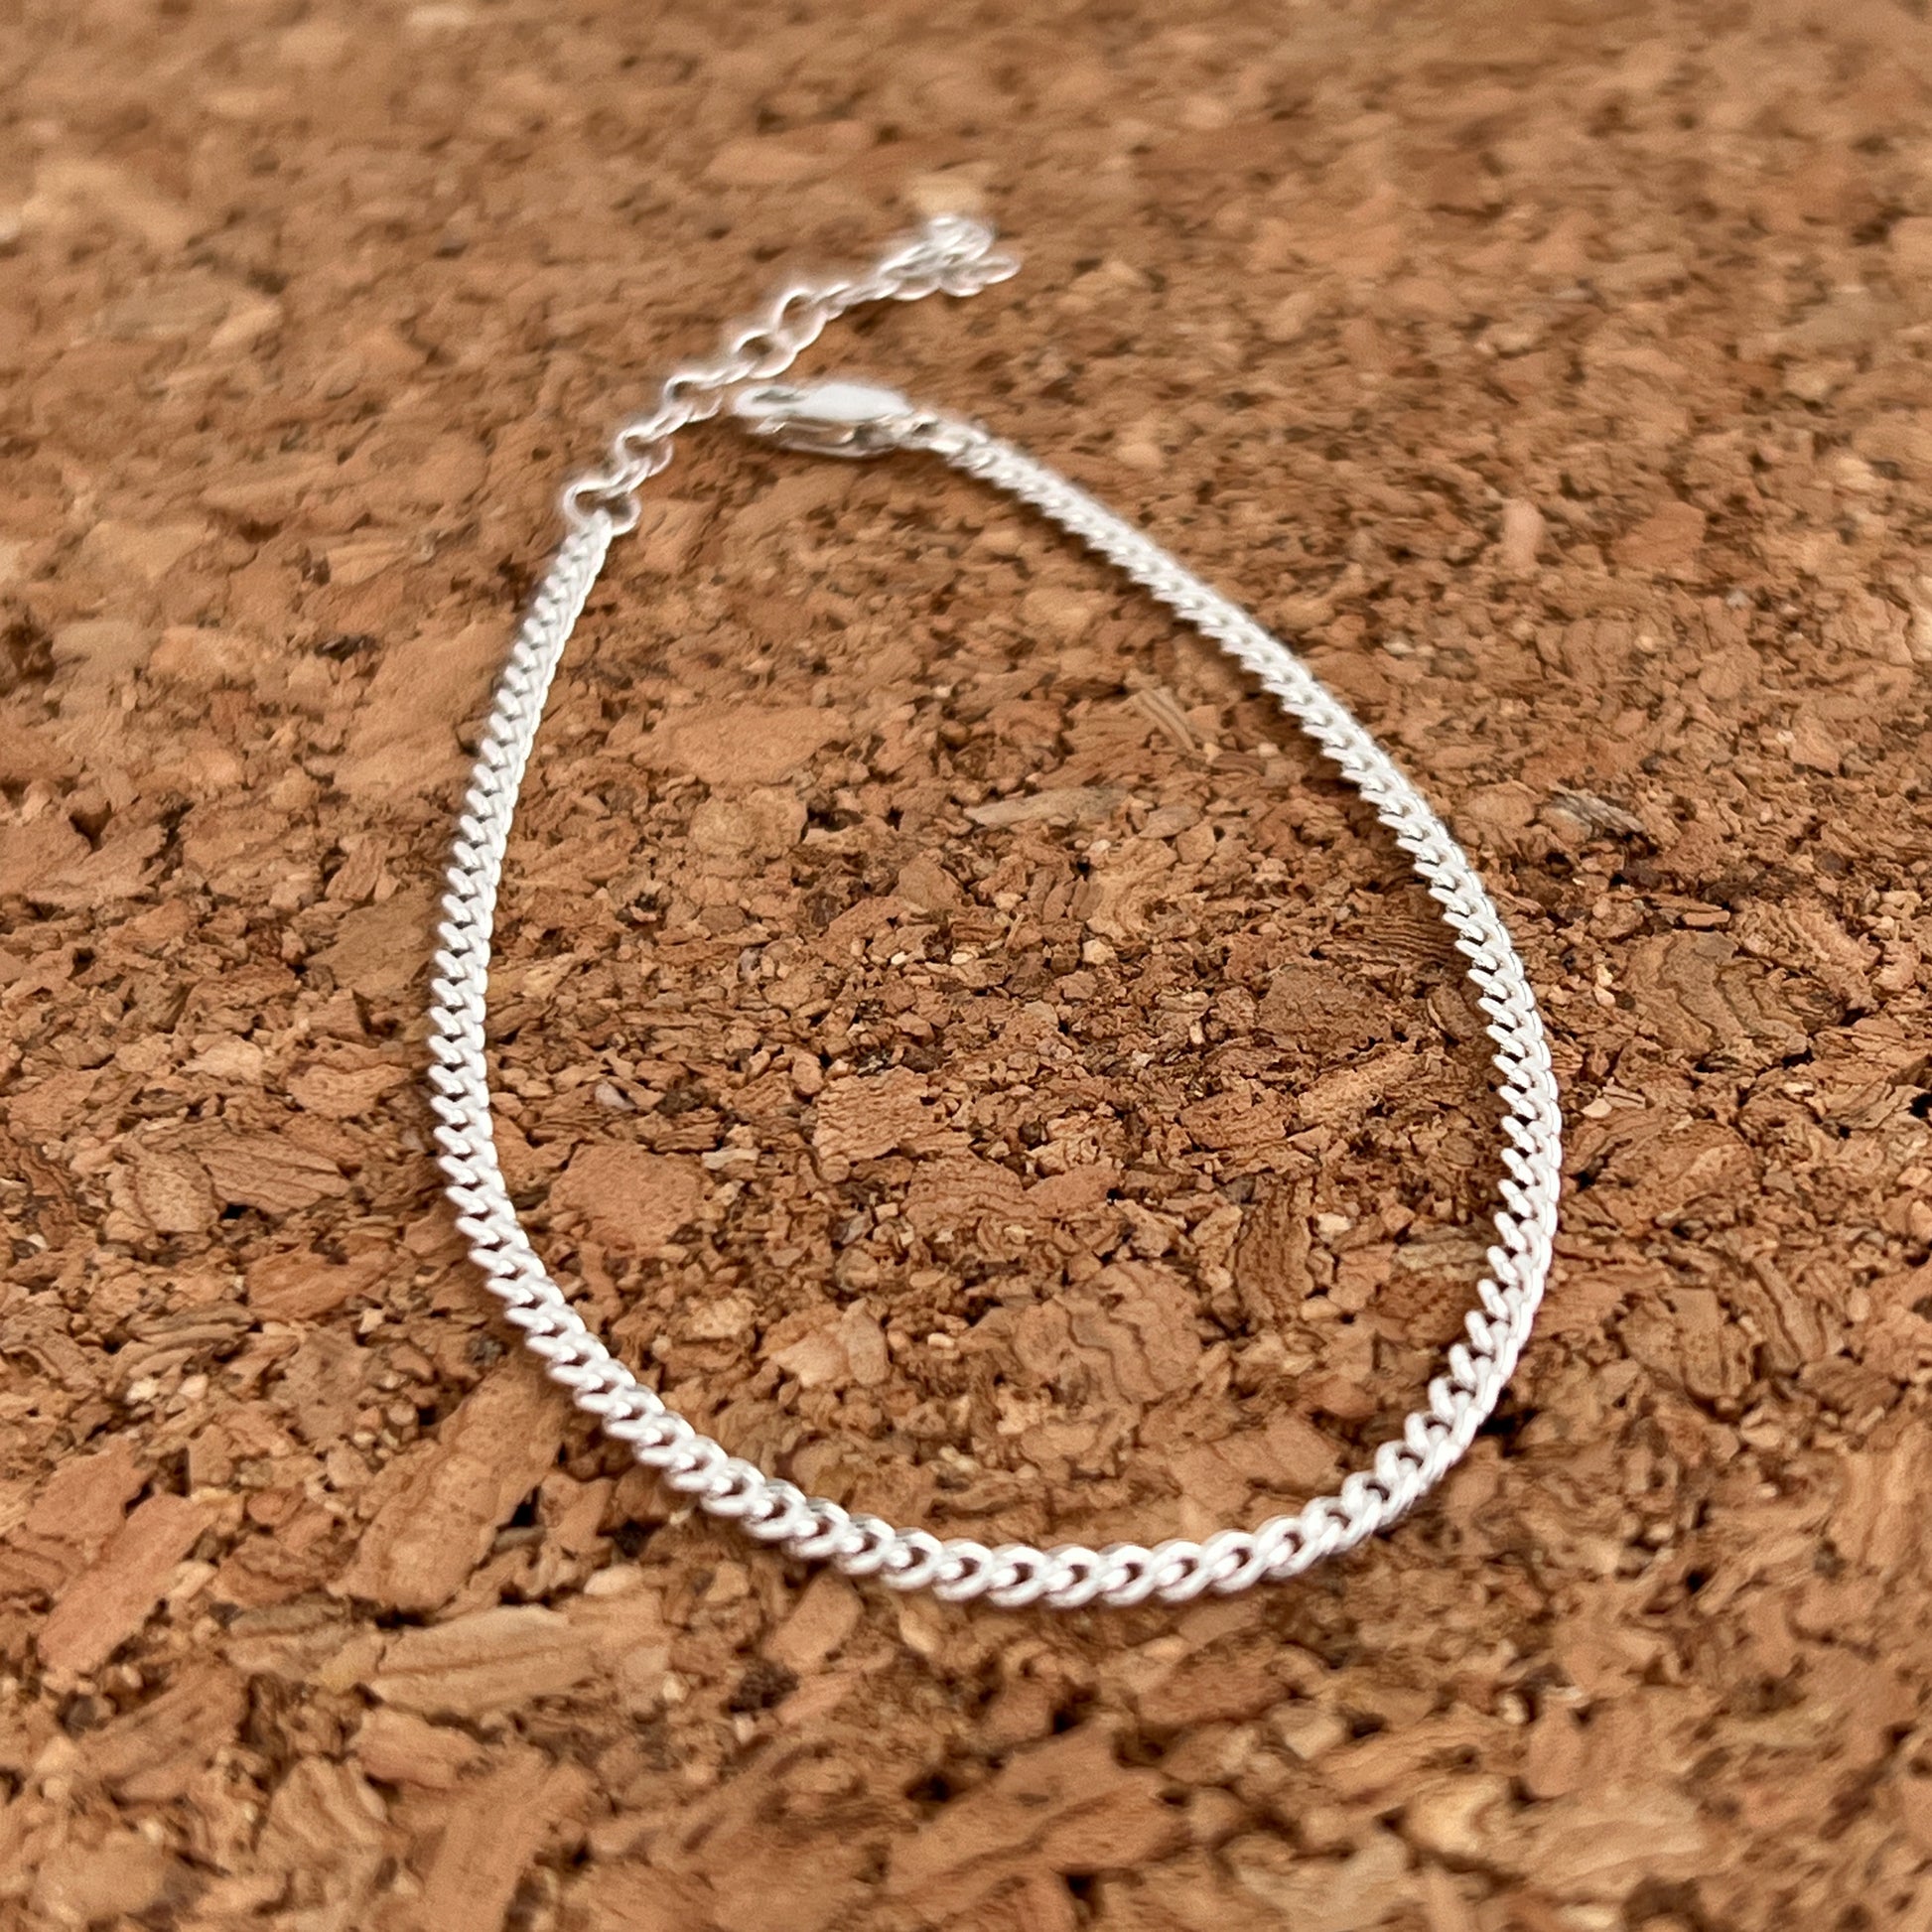 5 Reasons Why Sterling Silver Bangle Bracelet is the Best Gift for You -  diamondiiz.com